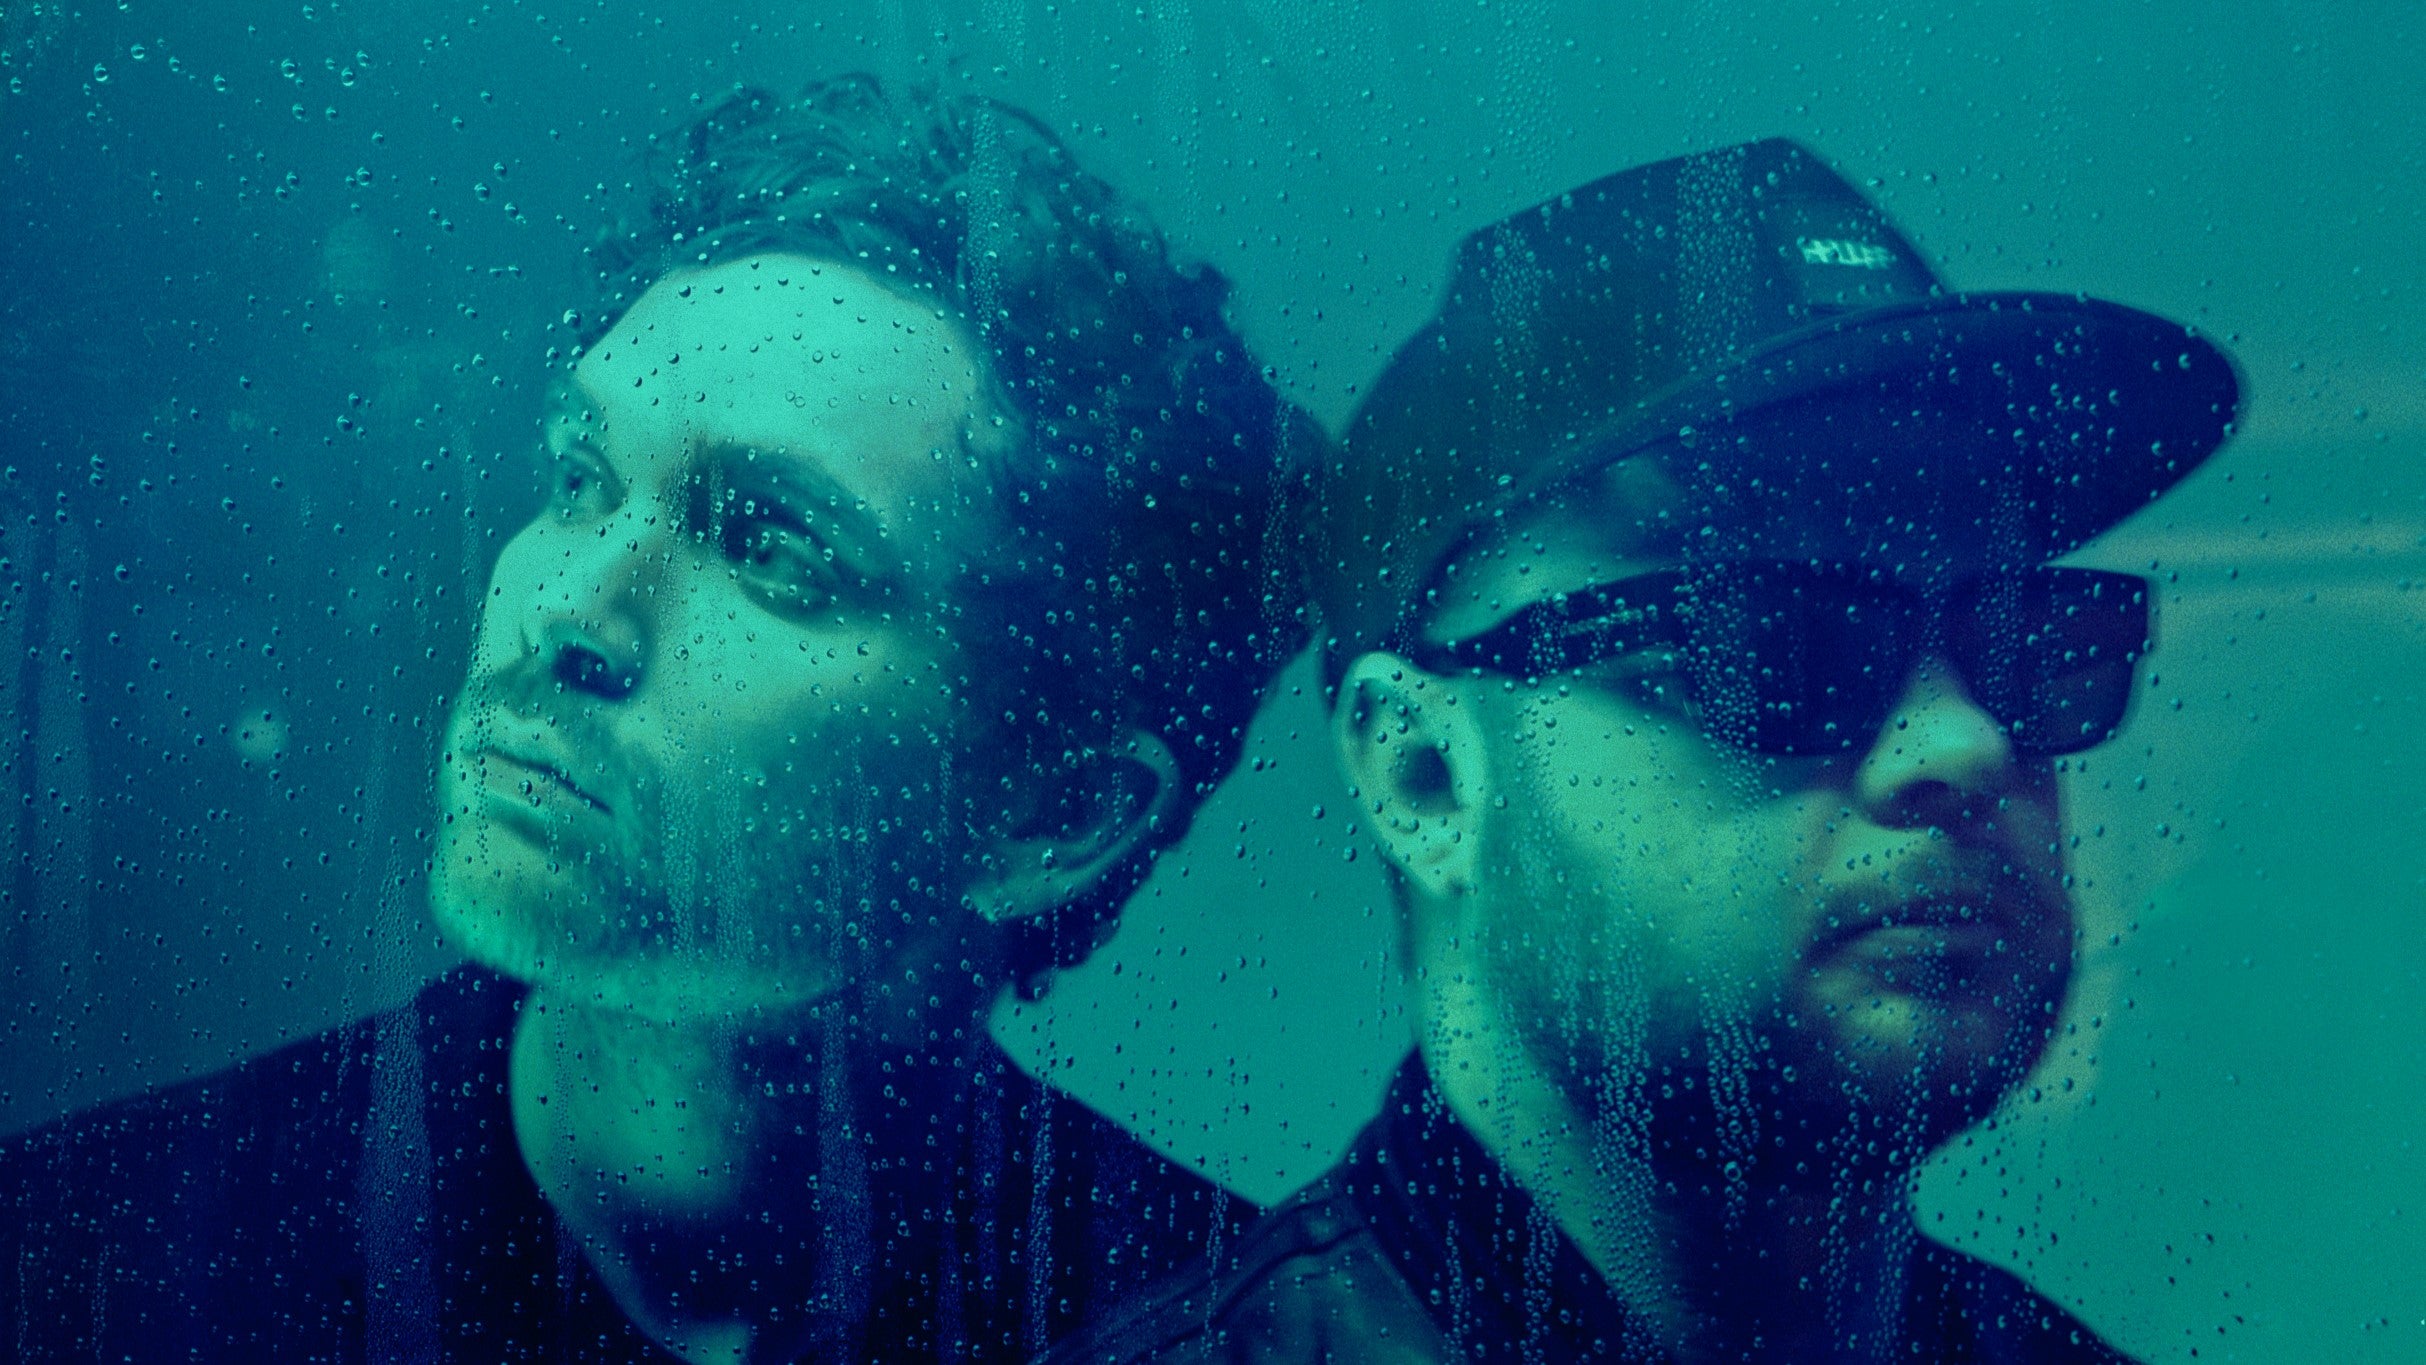 Royal Blood presale code for early tickets in Seattle